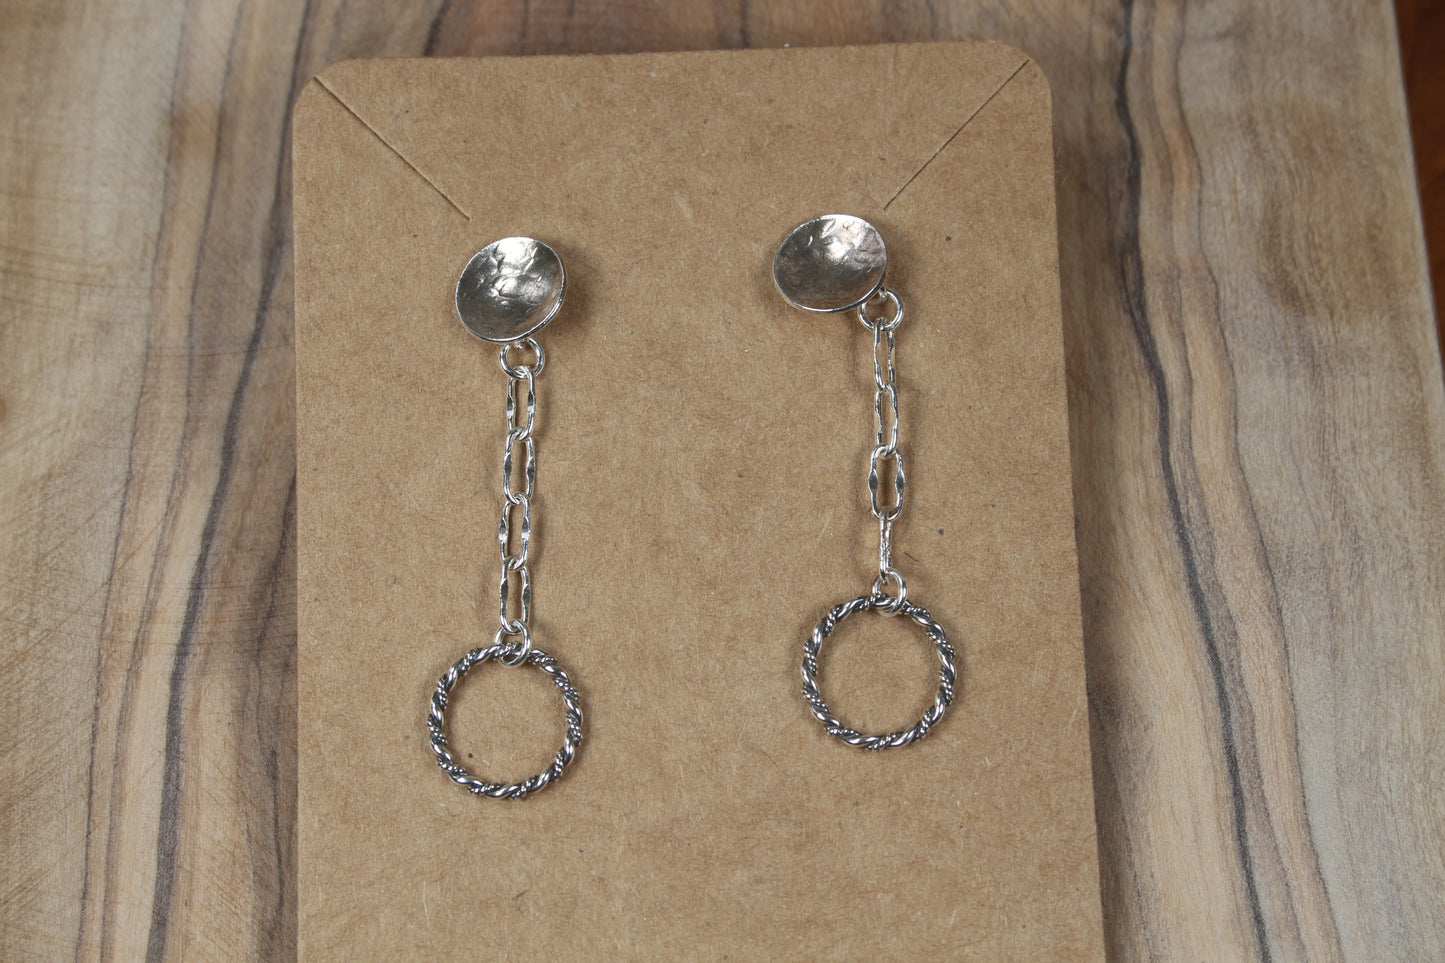 Circles on Chains from discs Earrings